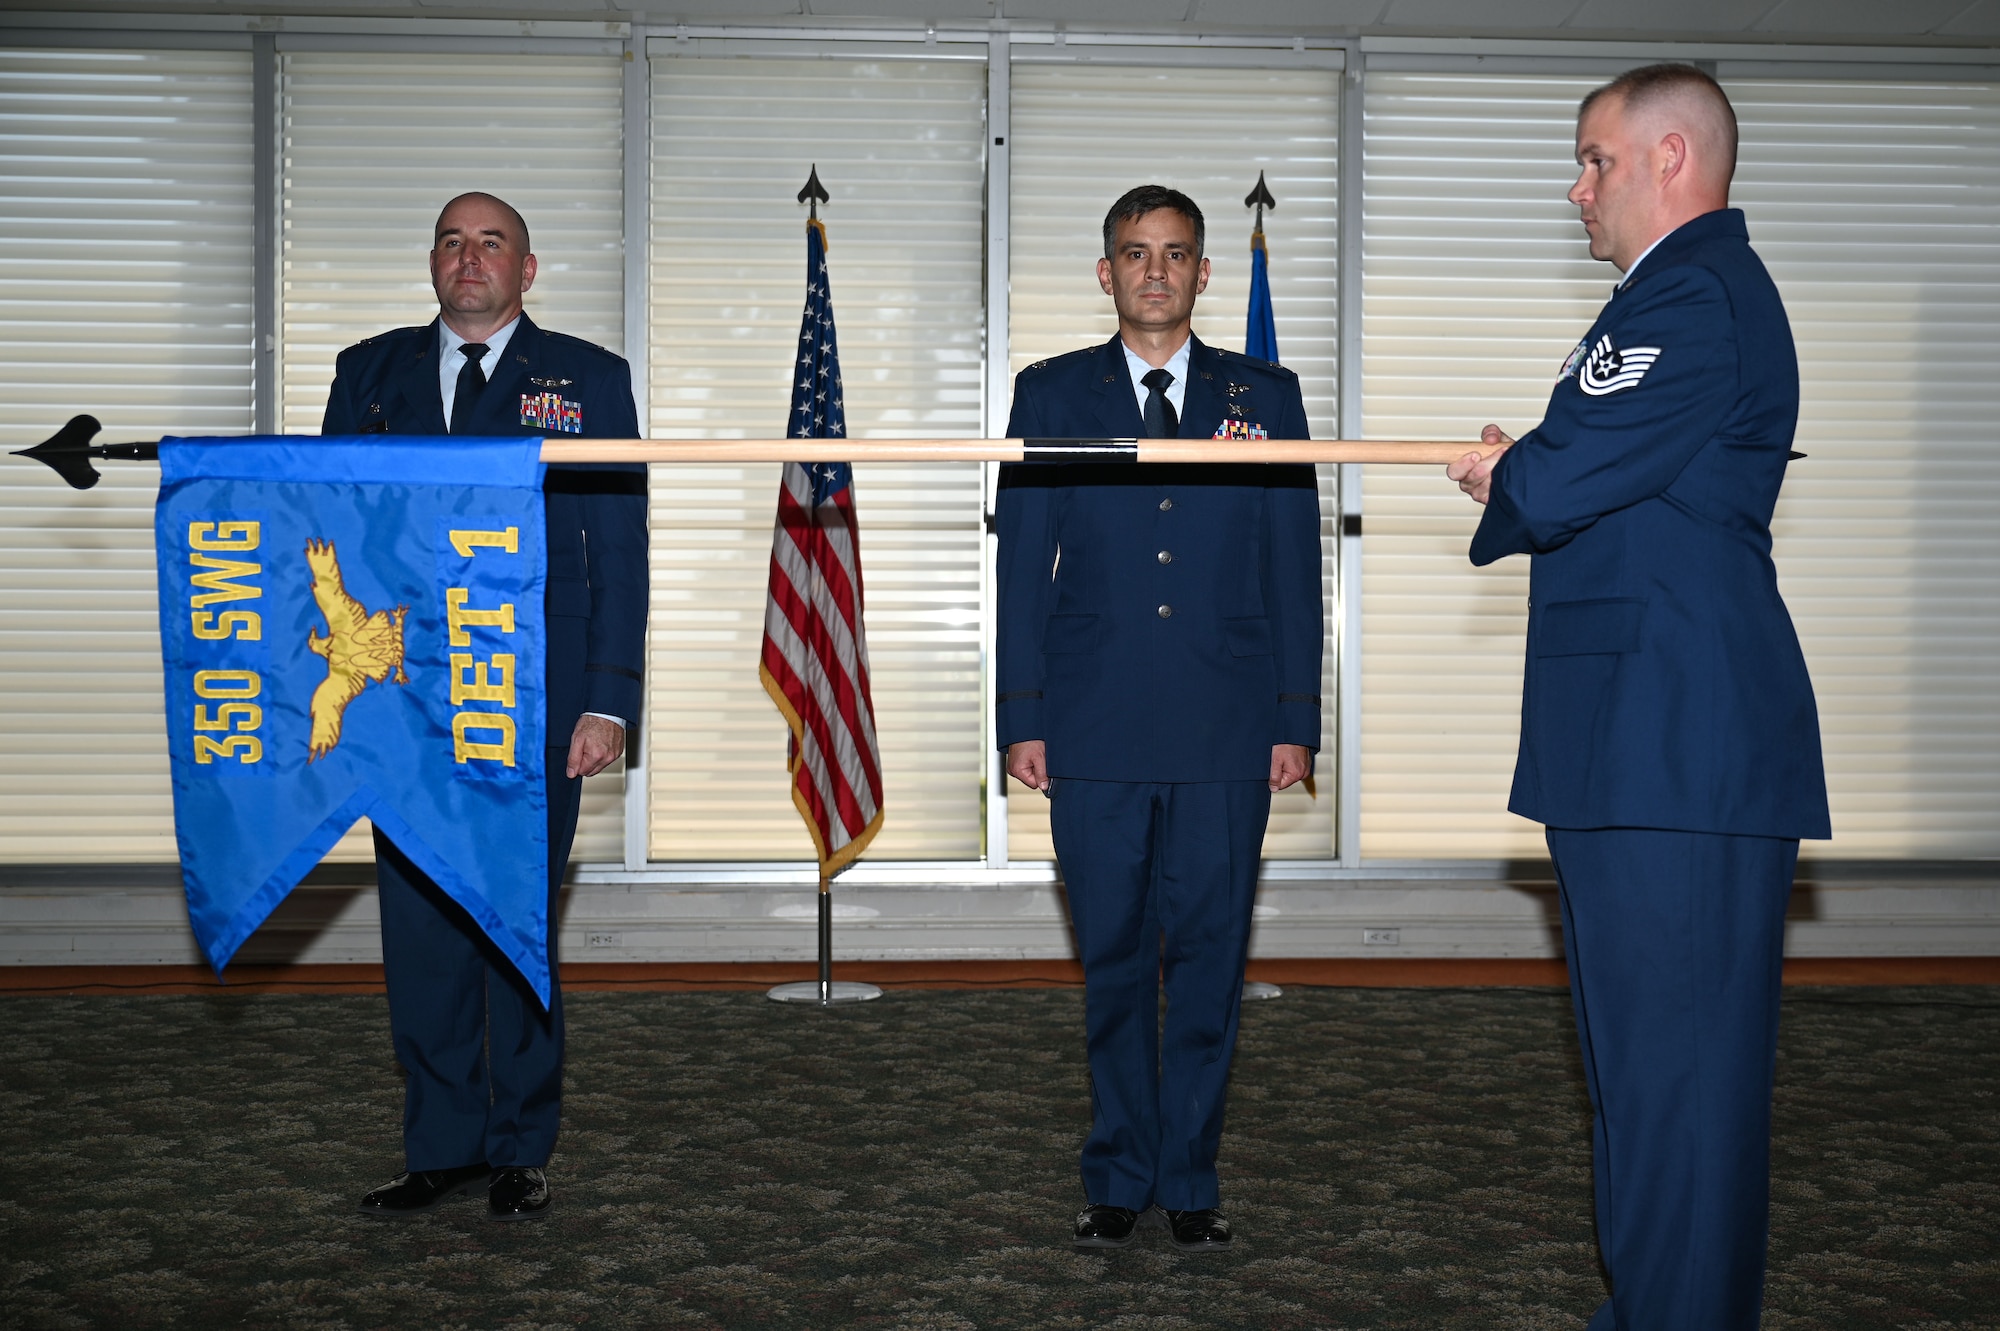 U.S. Air Force Col. Robert Cocke, 350th Spectrum Warfare Group commander, left, passes the guidon to U.S. Air Force Lt. Col. Luke Marron, 350th Spectrum Warfare Group, Detachment 1 assuming commander, right, at Eglin Air Force Base, Aug. 25, 2023. The 350th SWG, Det 1 will enhance the Combat Air Force’s survivability in the electromagnetic spectrum while accomplishing function and theater-specific Combatant Commander assigned missions.
(U.S. Air Force photo by Staff Sgt. Ericka A. Woolever)